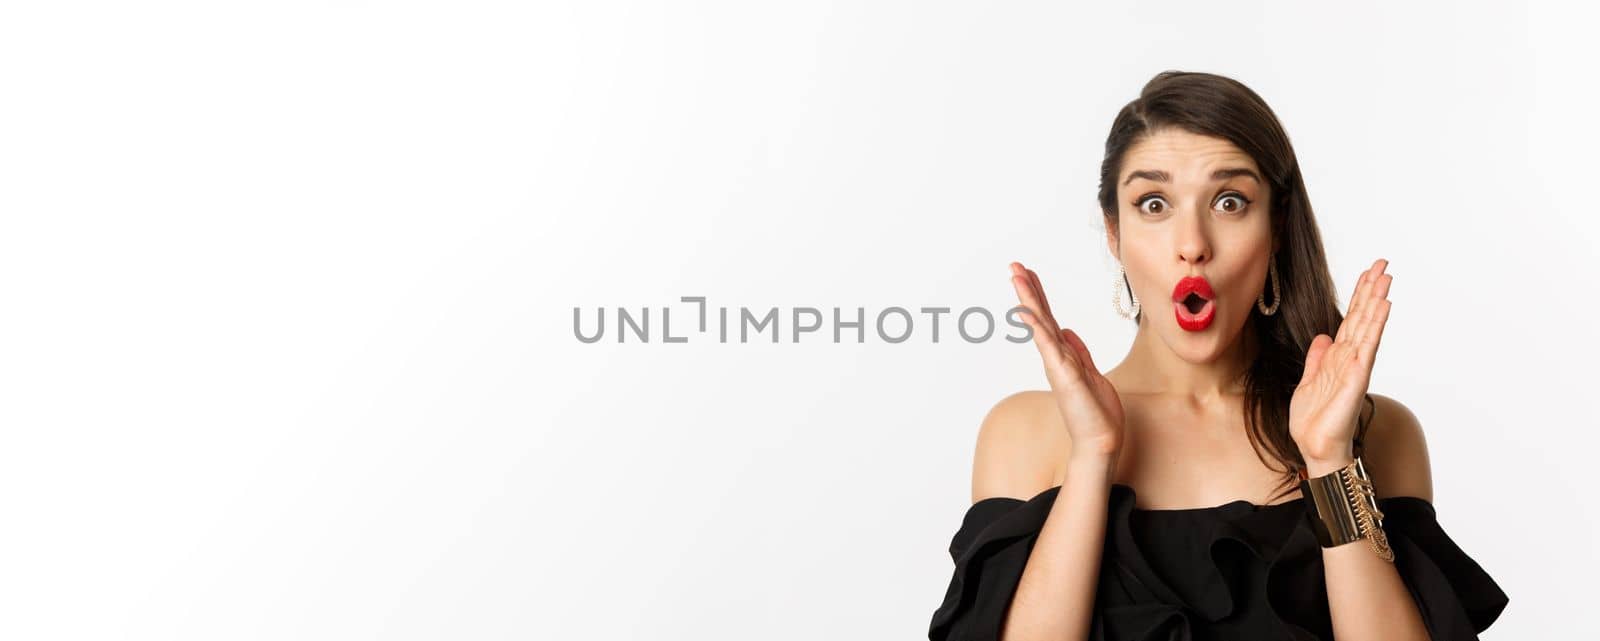 Fashion and beauty concept. Close-up of excited woman with makeup and red lipstick on, looking surprised and glad, standing over white background.